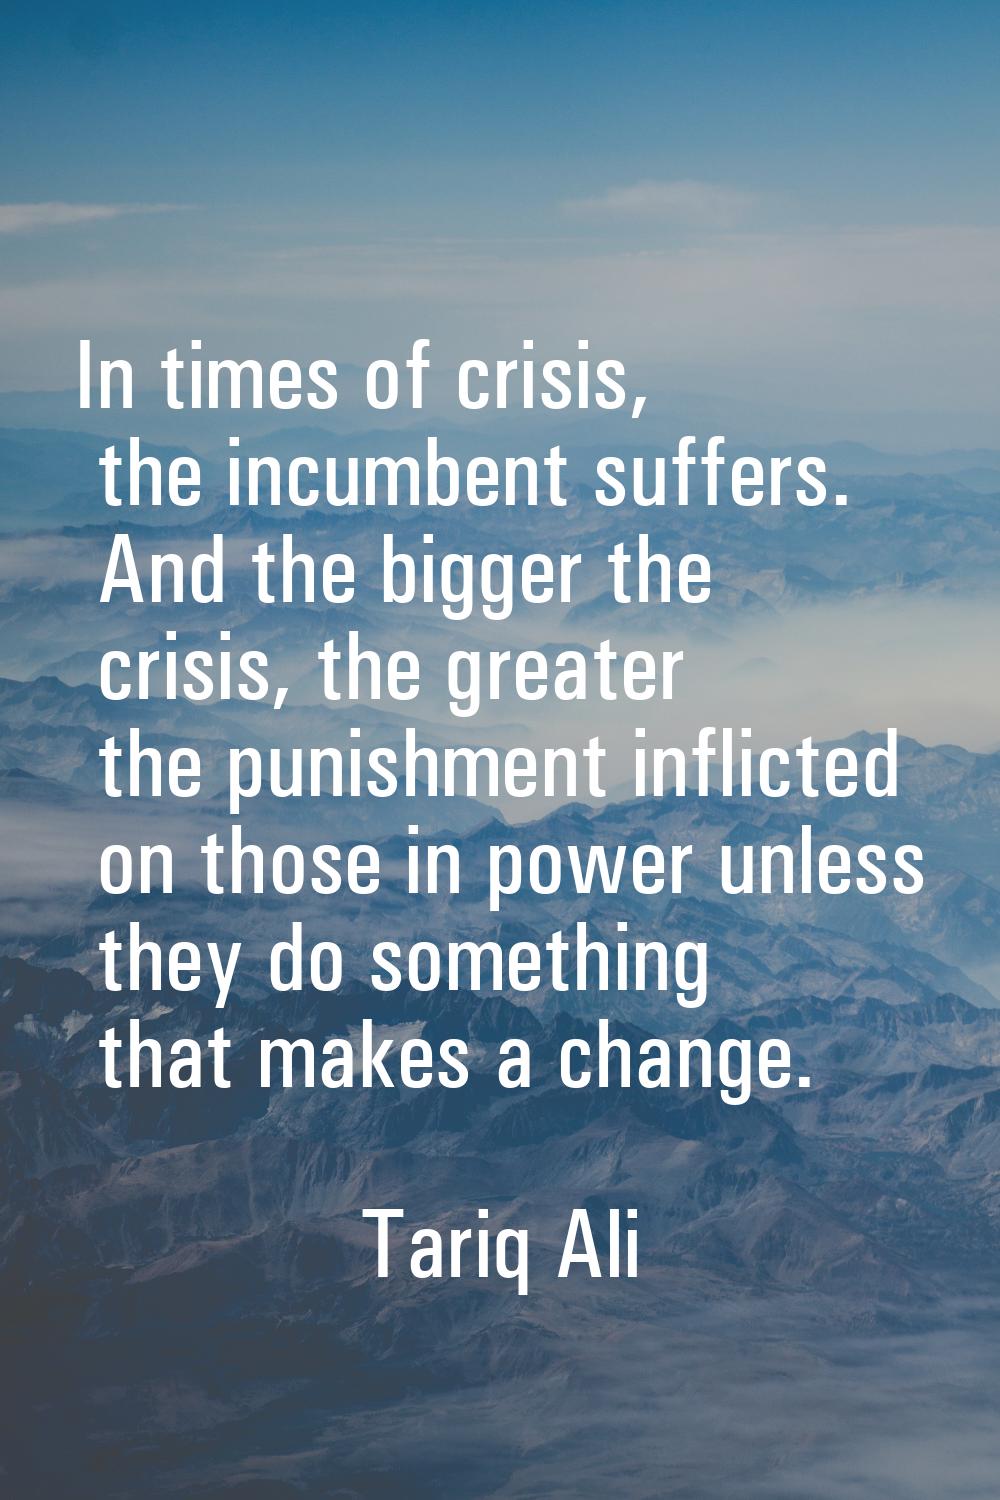 In times of crisis, the incumbent suffers. And the bigger the crisis, the greater the punishment in